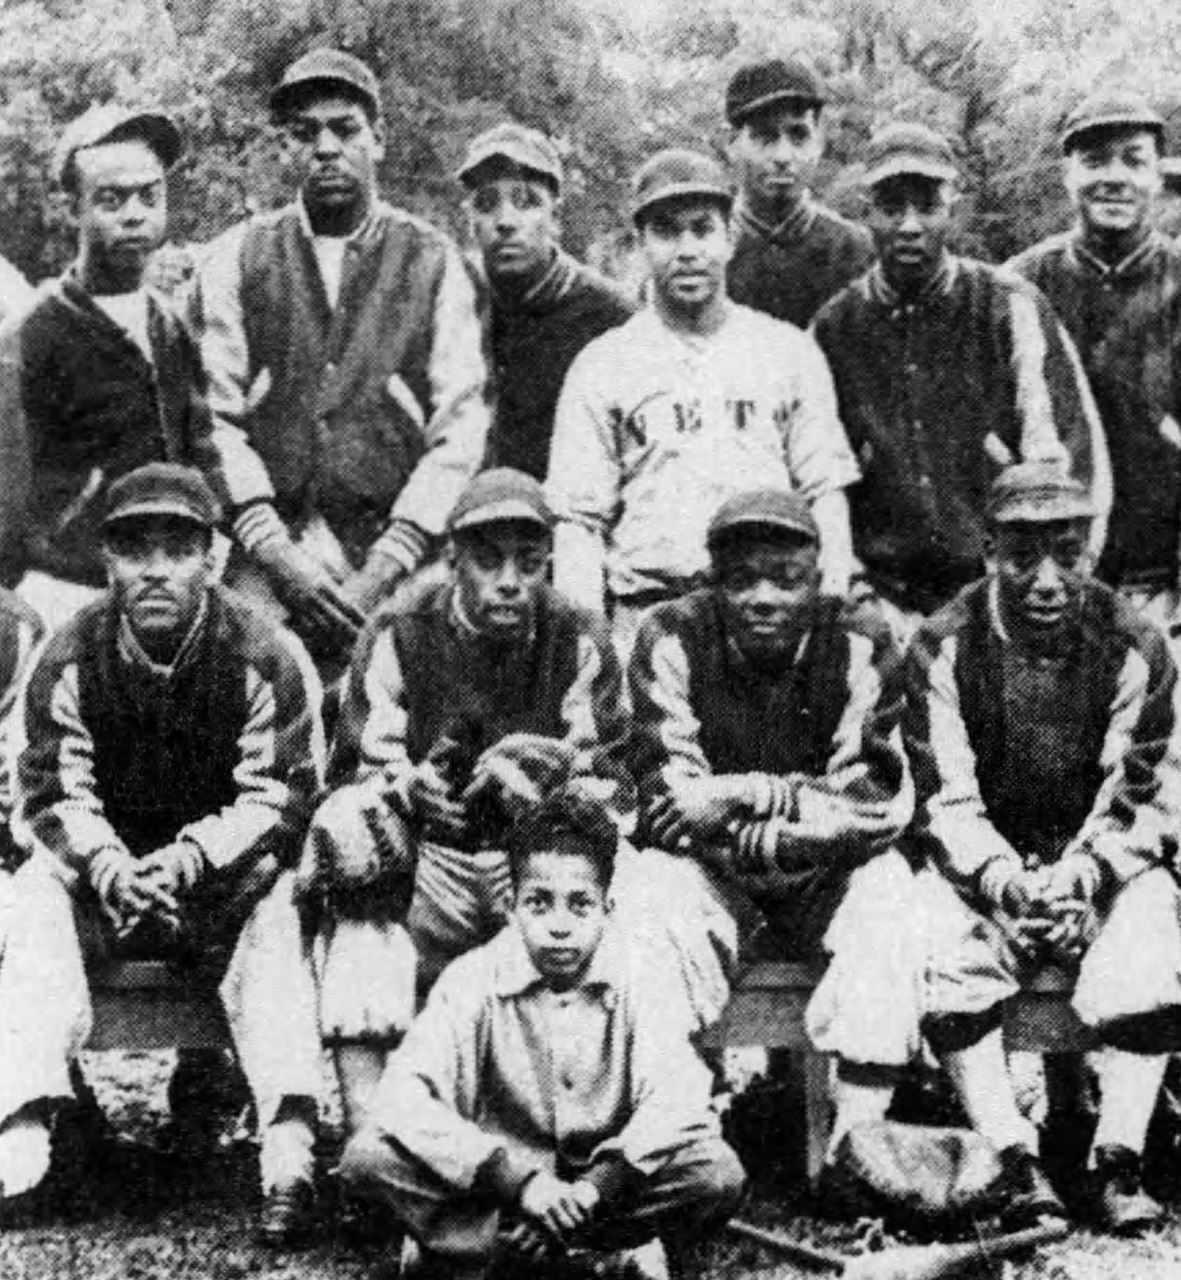 Image of the Ithaca's Colored Vets baseball team sometime in the 1940s. Players are arranged in 3 uneven rows.